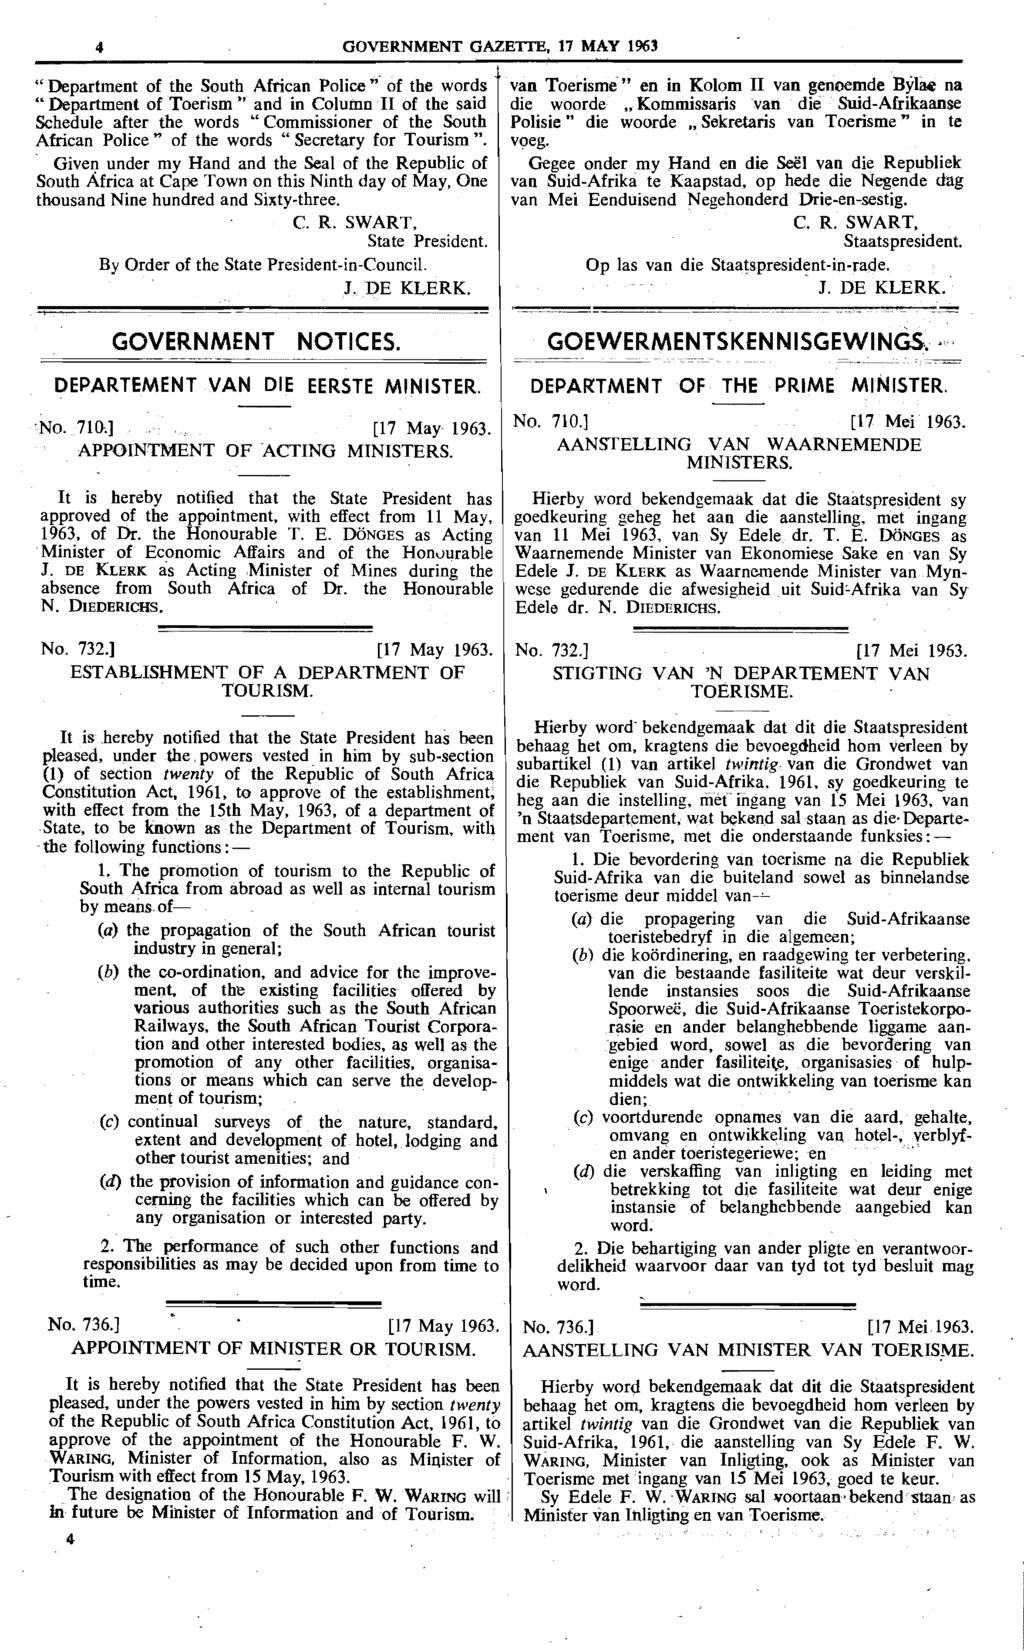 4 GOVERNMENT GAZETTE. 17 MAY 1963 "Department of the South African Police'" of the words "Department of Toerism.